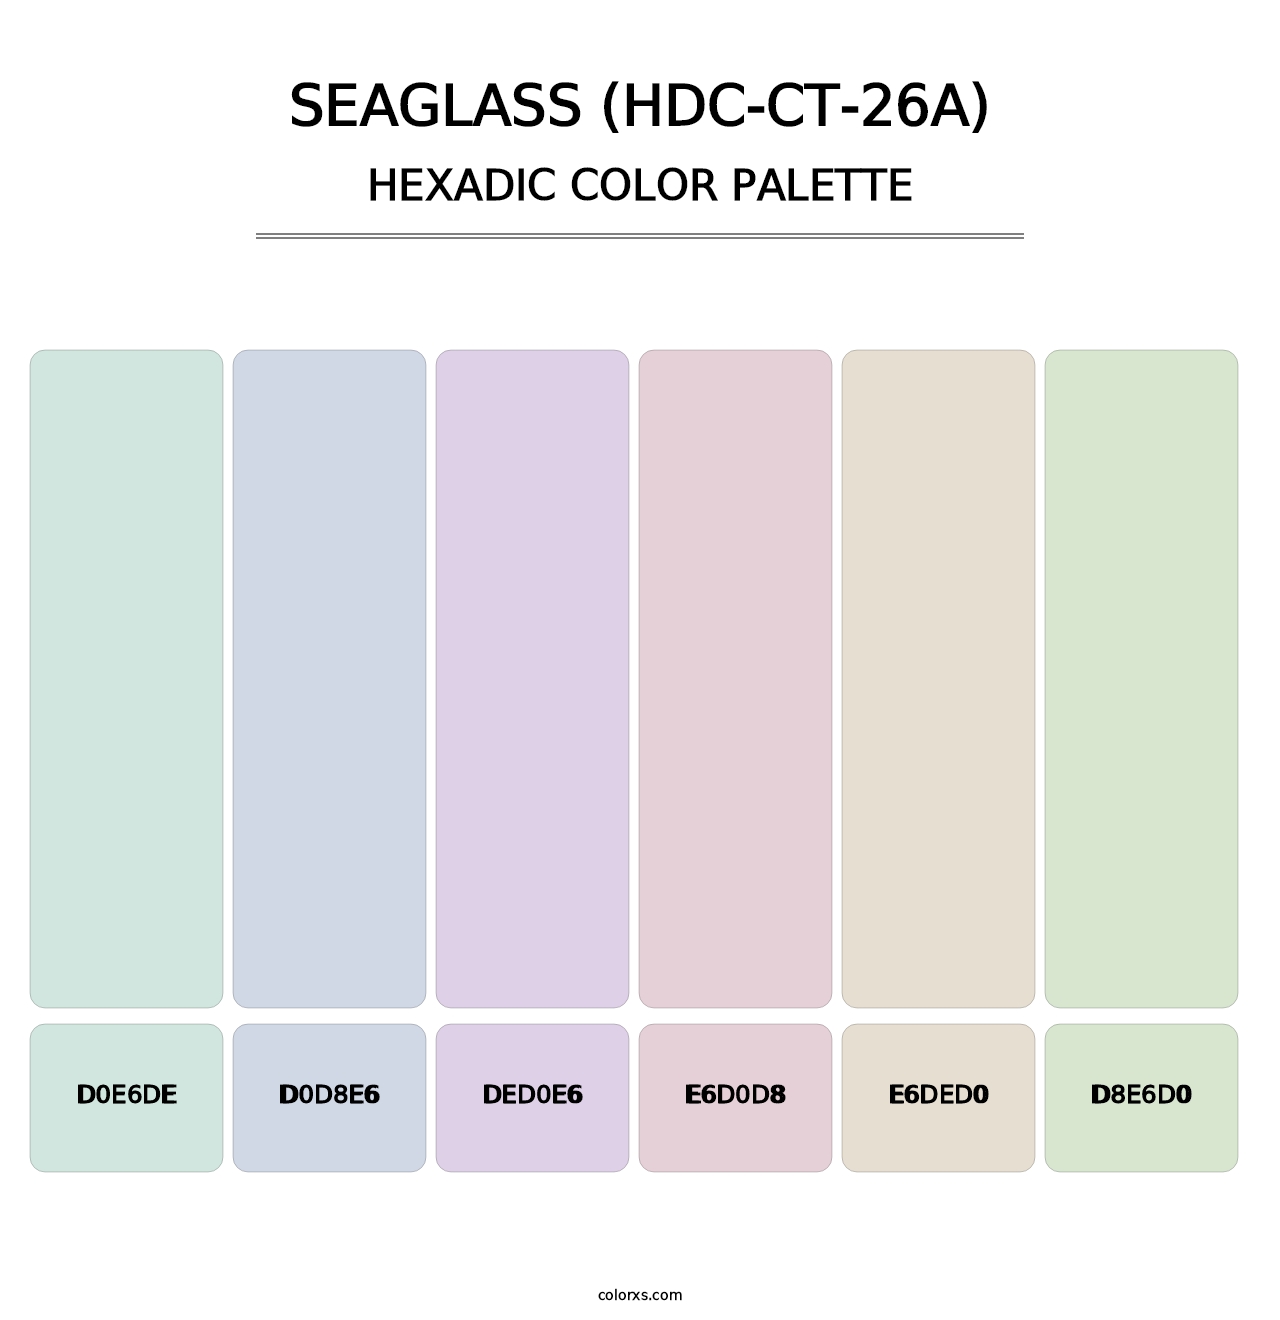 Seaglass (HDC-CT-26A) - Hexadic Color Palette